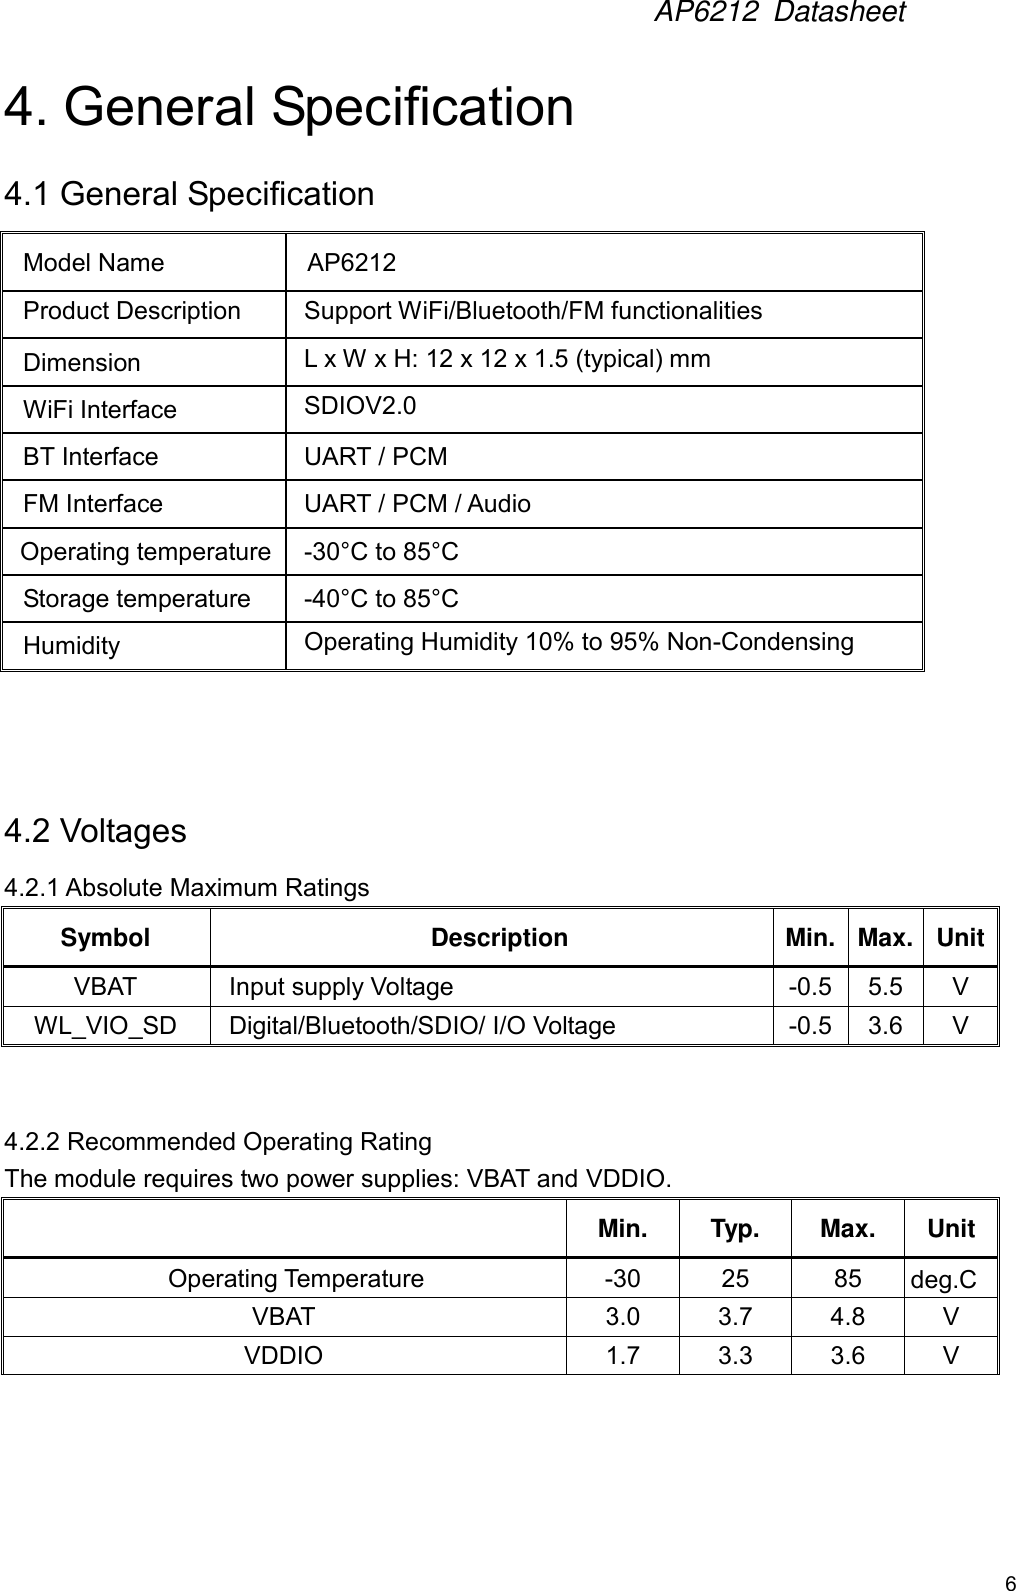 AP6212  Datasheet6 4. General Specification4.1 General Specification 4.2 Voltages 4.2.1 Absolute Maximum Ratings Symbol Description Min. Max. Unit VBAT Input supply Voltage -0.55.5 V WL_VIO_SD Digital/Bluetooth/SDIO/ I/O Voltage -0.53.6 V 4.2.2 Recommended Operating Rating   The module requires two power supplies: VBAT and VDDIO. Min. Typ. Max. Unit   Operating Temperature -3025 85 deg.CVBAT 3.0 3.74.8 V VDDIO 1.7 3.3 3.6 V Model Name AP6212 Product Description Support WiFi/Bluetooth/FM functionalities Dimension L x W x H: 12 x 12 x 1.5 (typical) mm WiFi Interface SDIOV2.0 BT Interface UART / PCM FM Interface UART / PCM / Audio Operating temperature -30°C to 85°CStorage temperature -40°C to 85°CHumidity Operating Humidity 10% to 95% Non-Condensing Storage Humidity 5% to 95% Non-Condensing